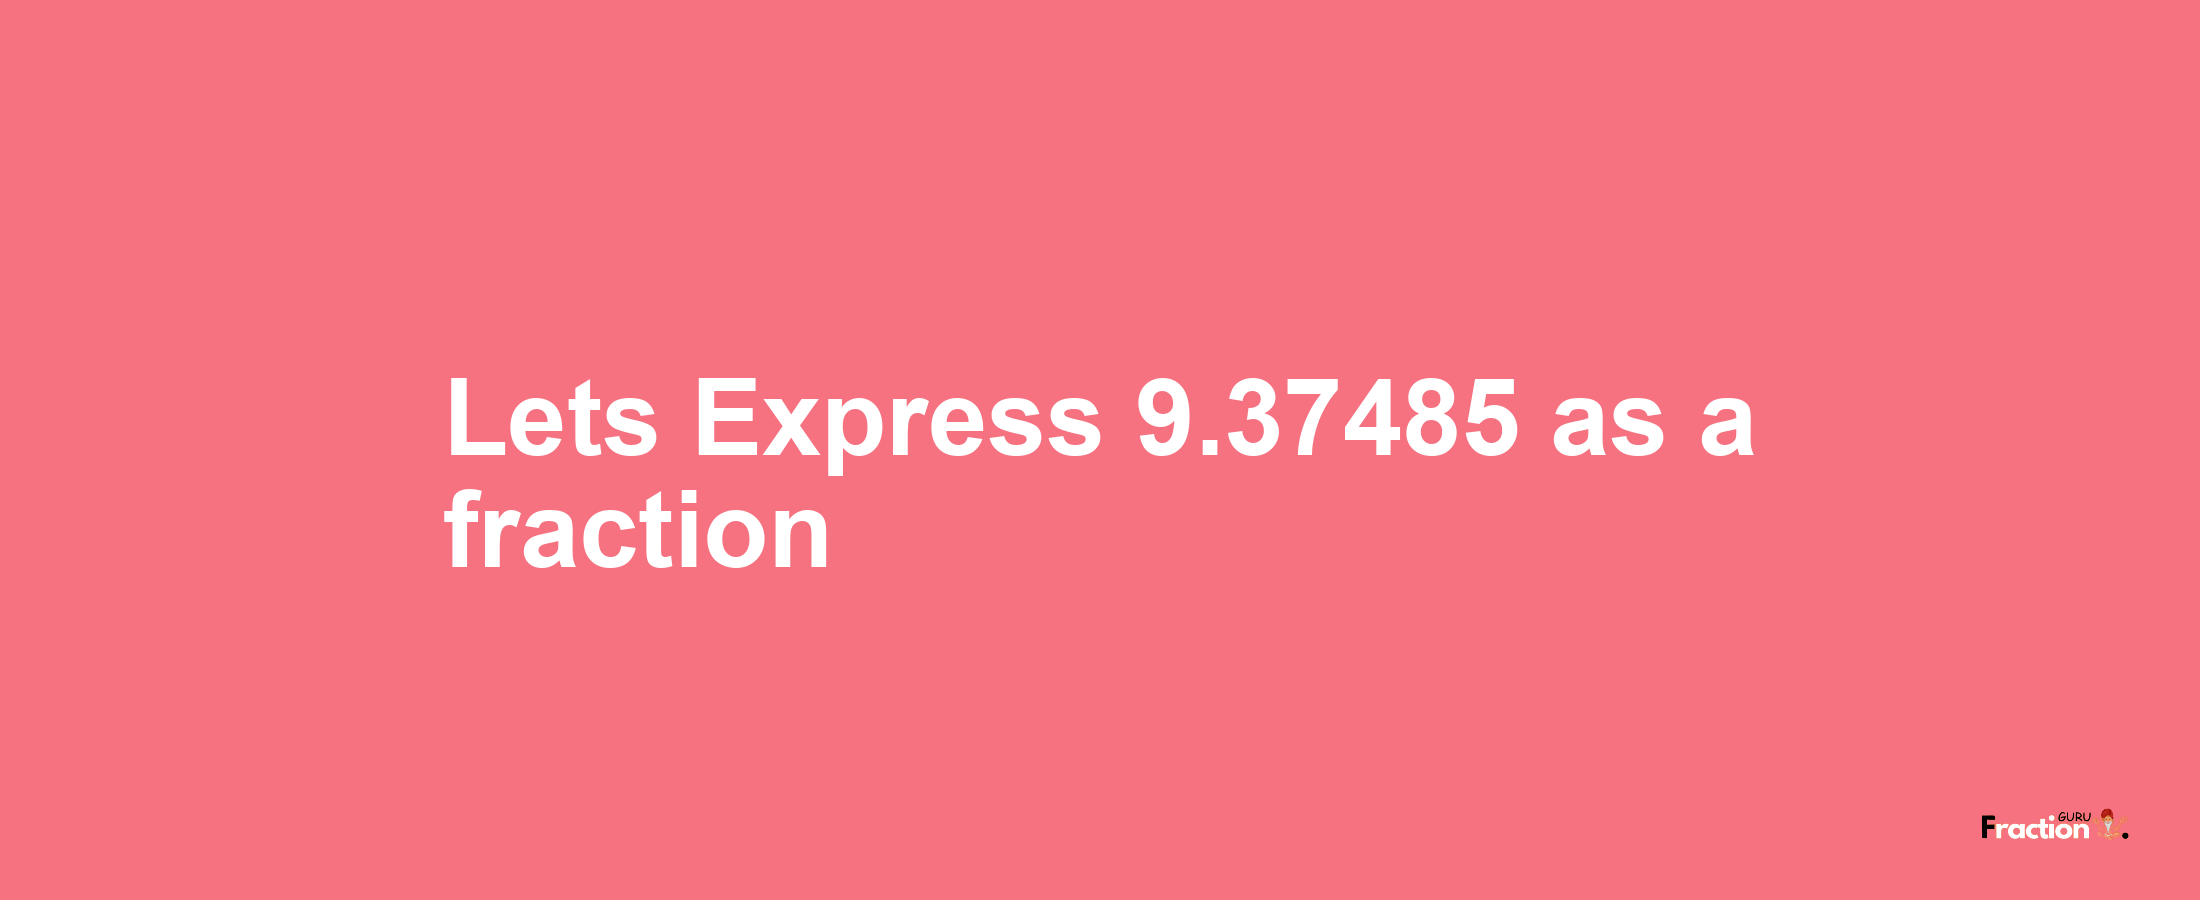 Lets Express 9.37485 as afraction